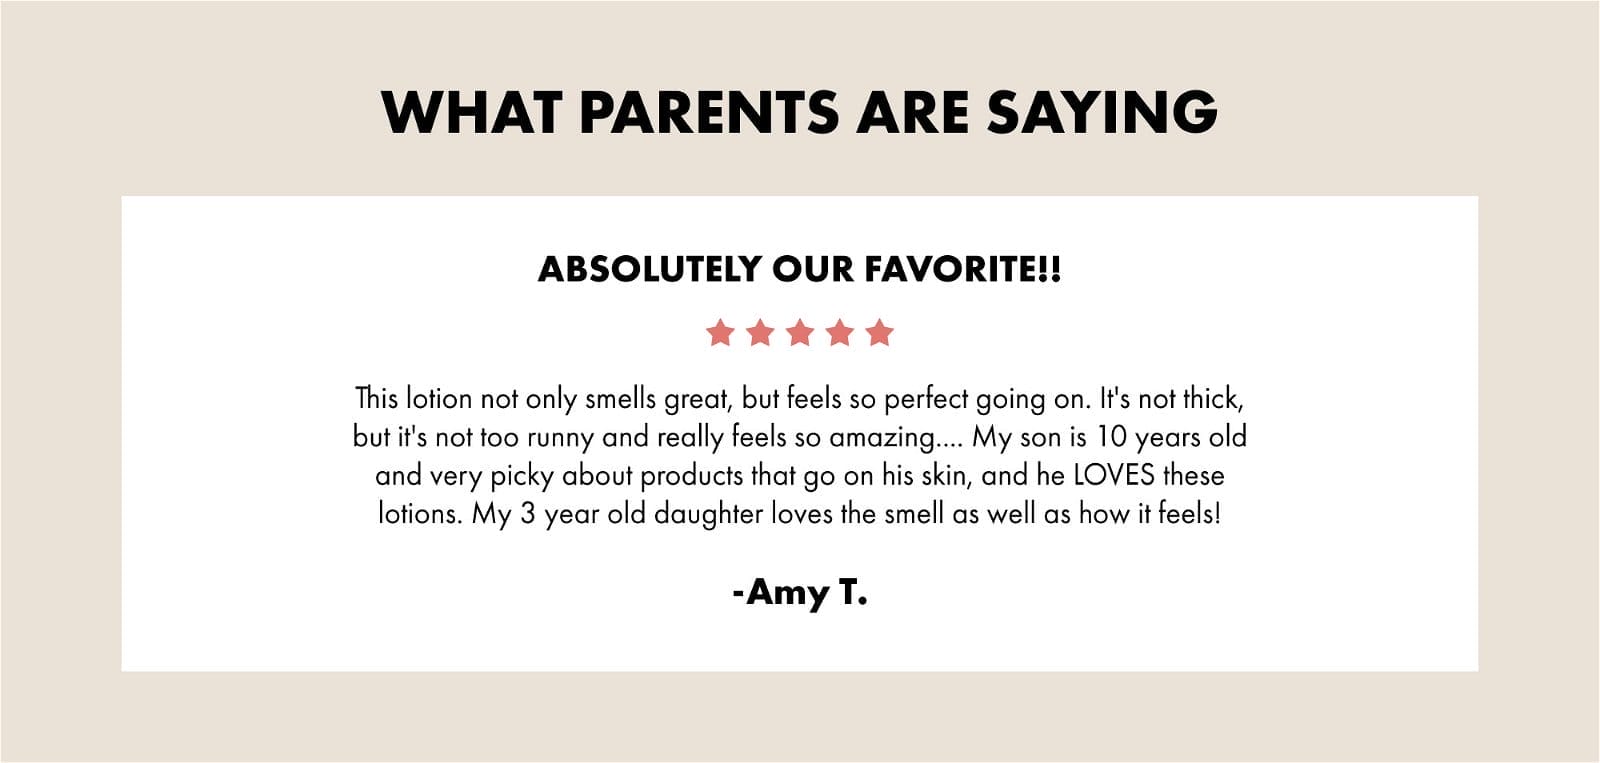 WHAT PARENTS ARE SAYING ABSOLUTELY OUR FAVORITE!! This lotion not only smells great, but feels so perfect going on. It's not thick, but it's not too runny and really feels so amazing... My son is 10 years old and very picky about products that go on his skin, and he LOVES these lotions. My 3 year old daughter loves the smell as well as how it feels! - Amy T.